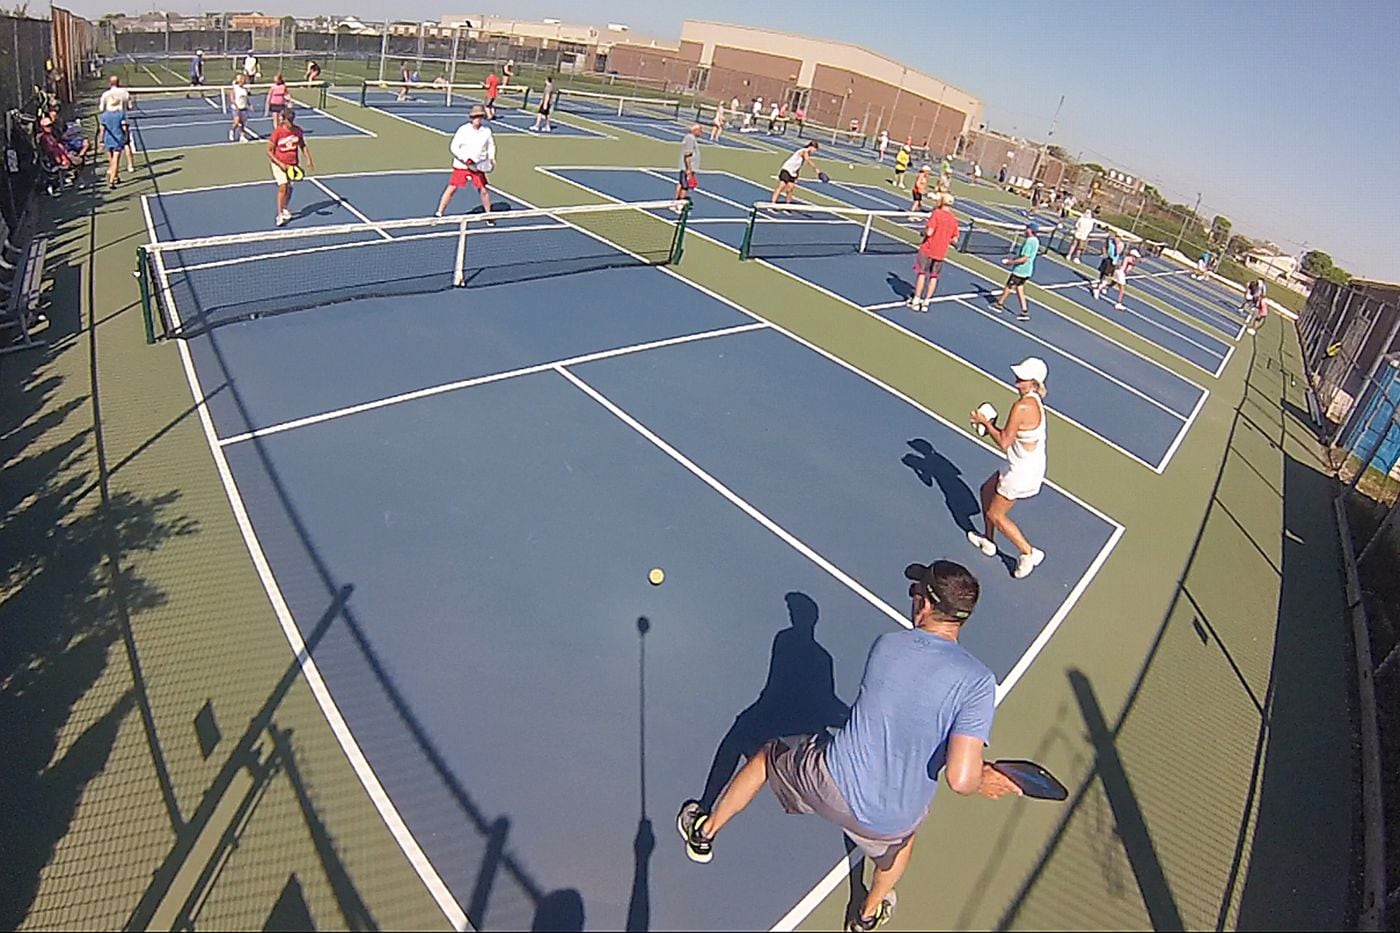 Ocean City and the most cutthroat pickleball game at the Jersey Shore